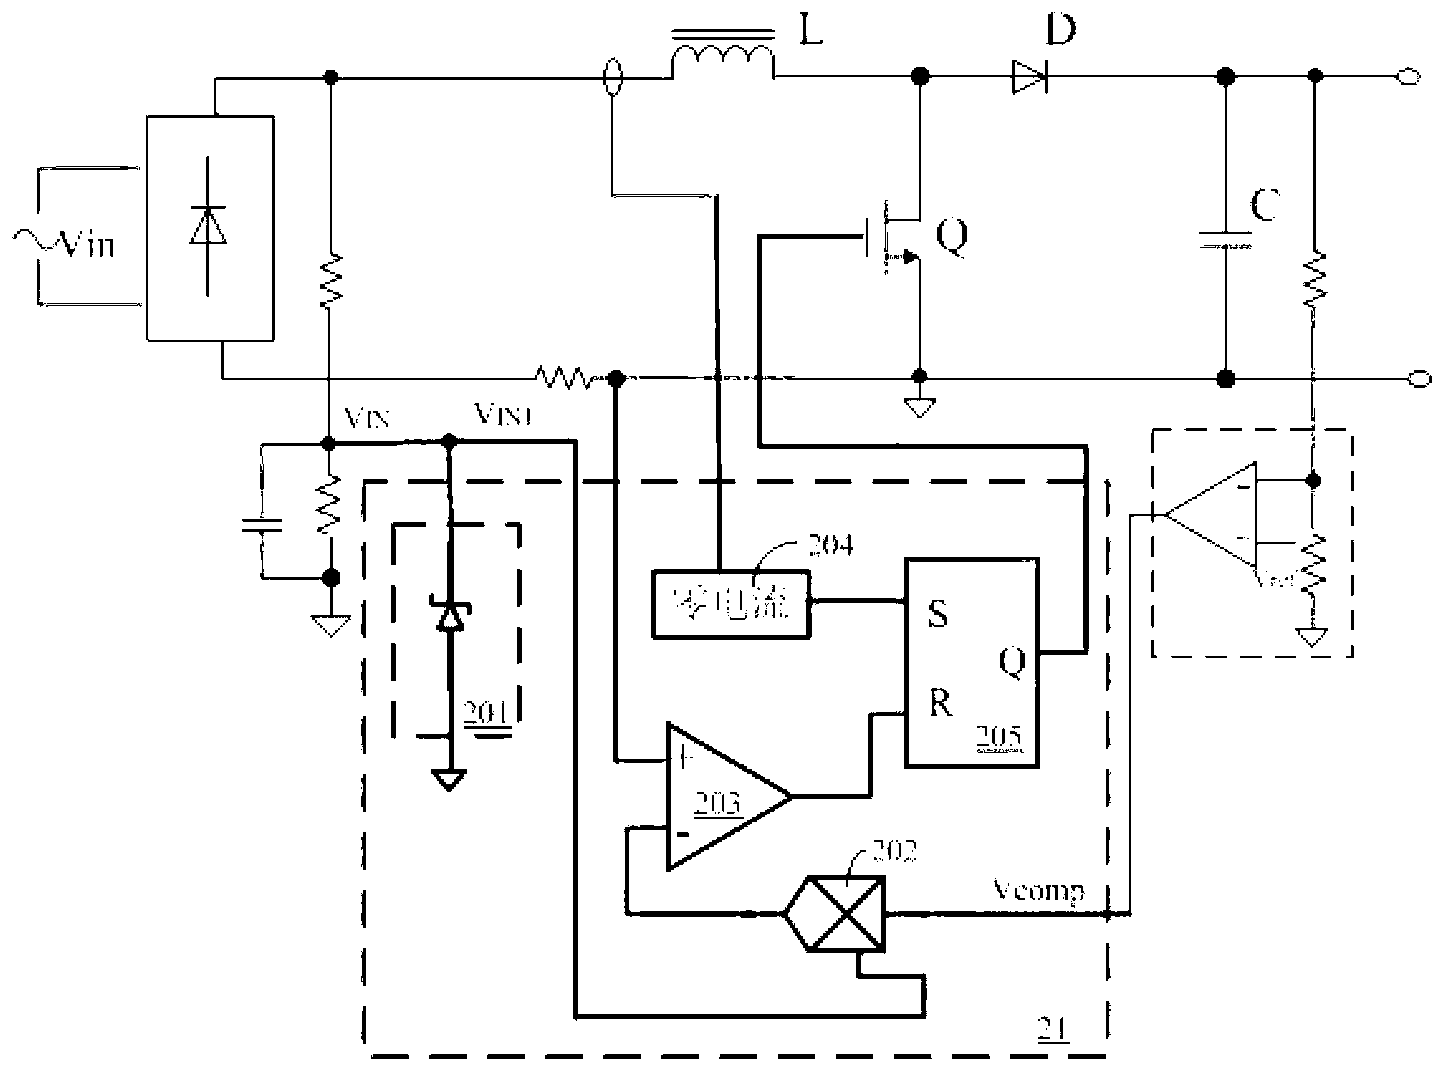 Power factor correction control circuit capable of reducing EMI